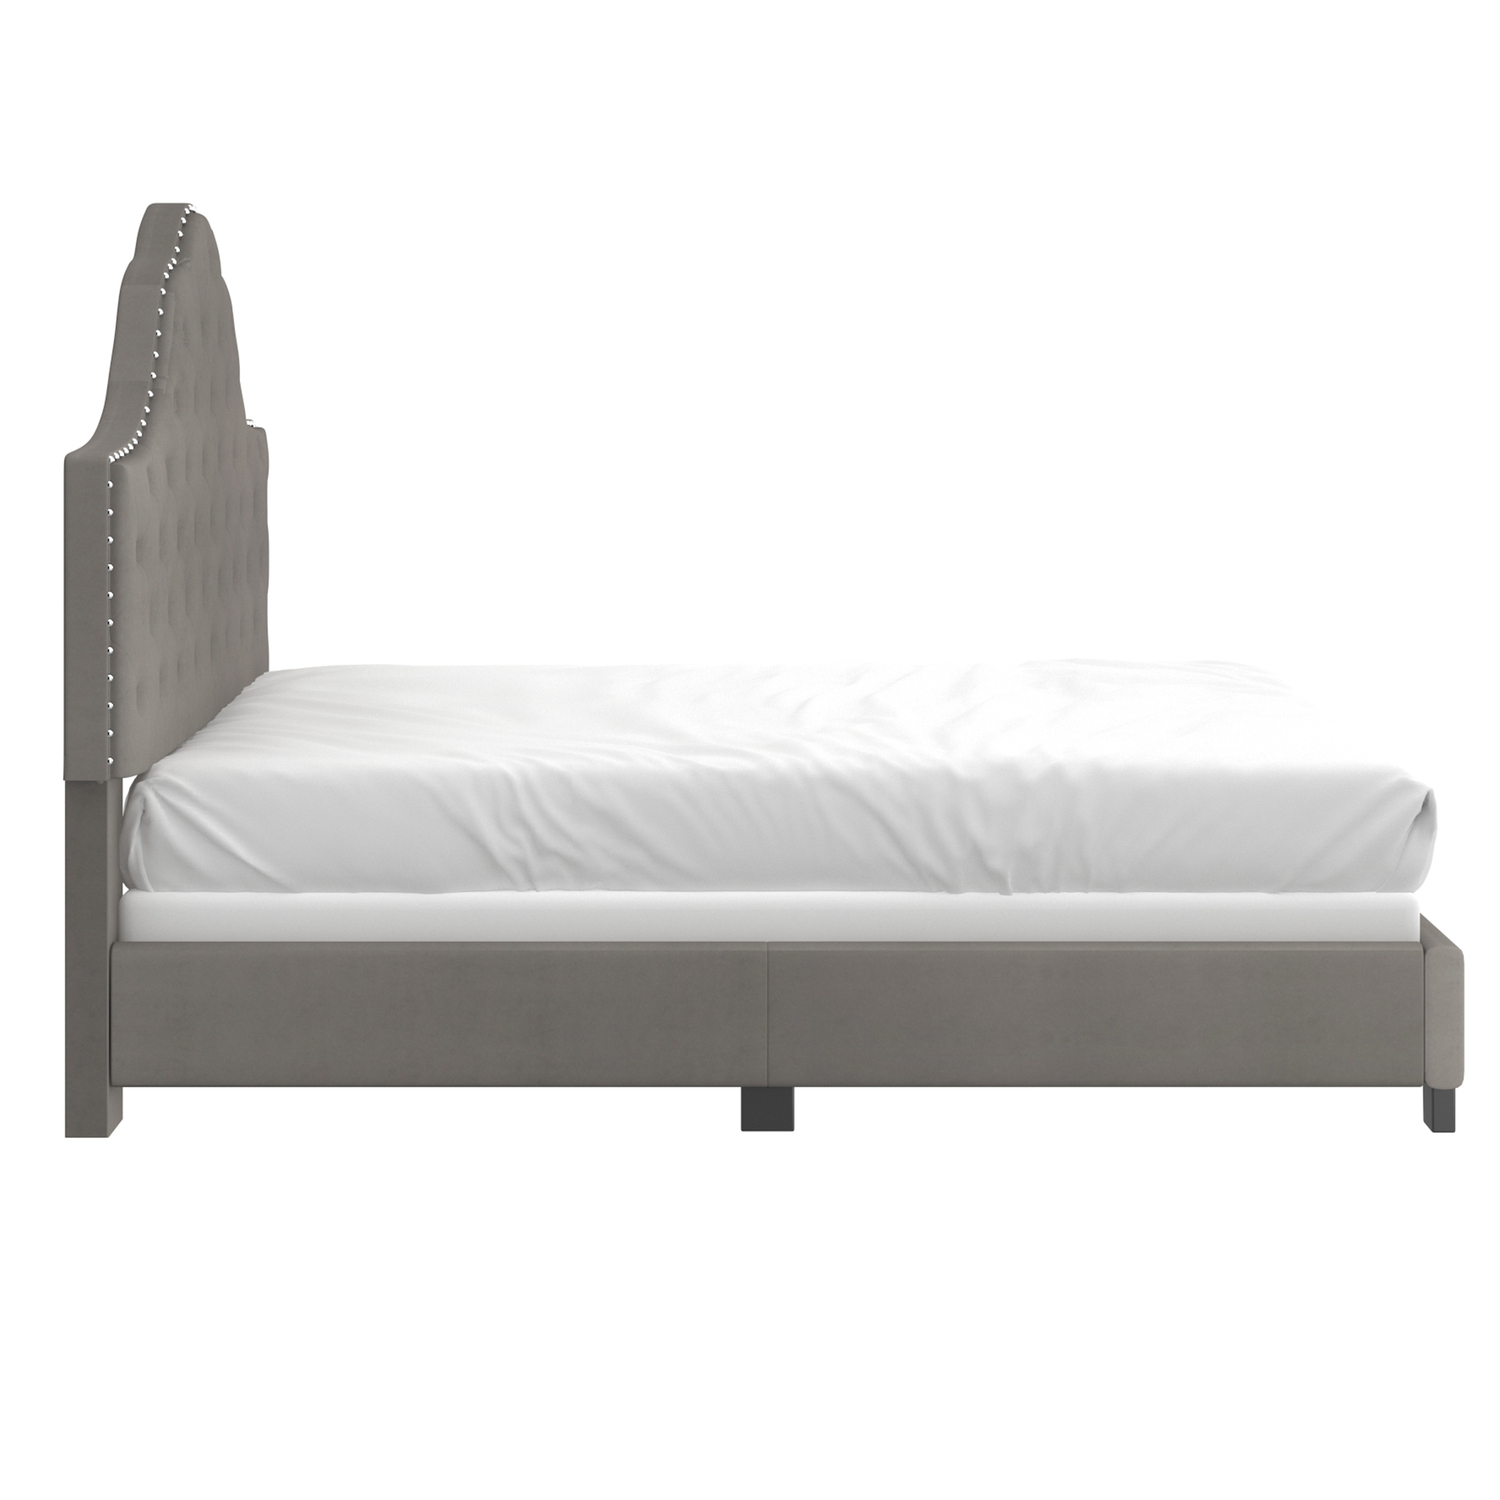 Nspire 101-292Q-GY 60 in. Greta Bed in Grey - Queen Size - image 5 of 6